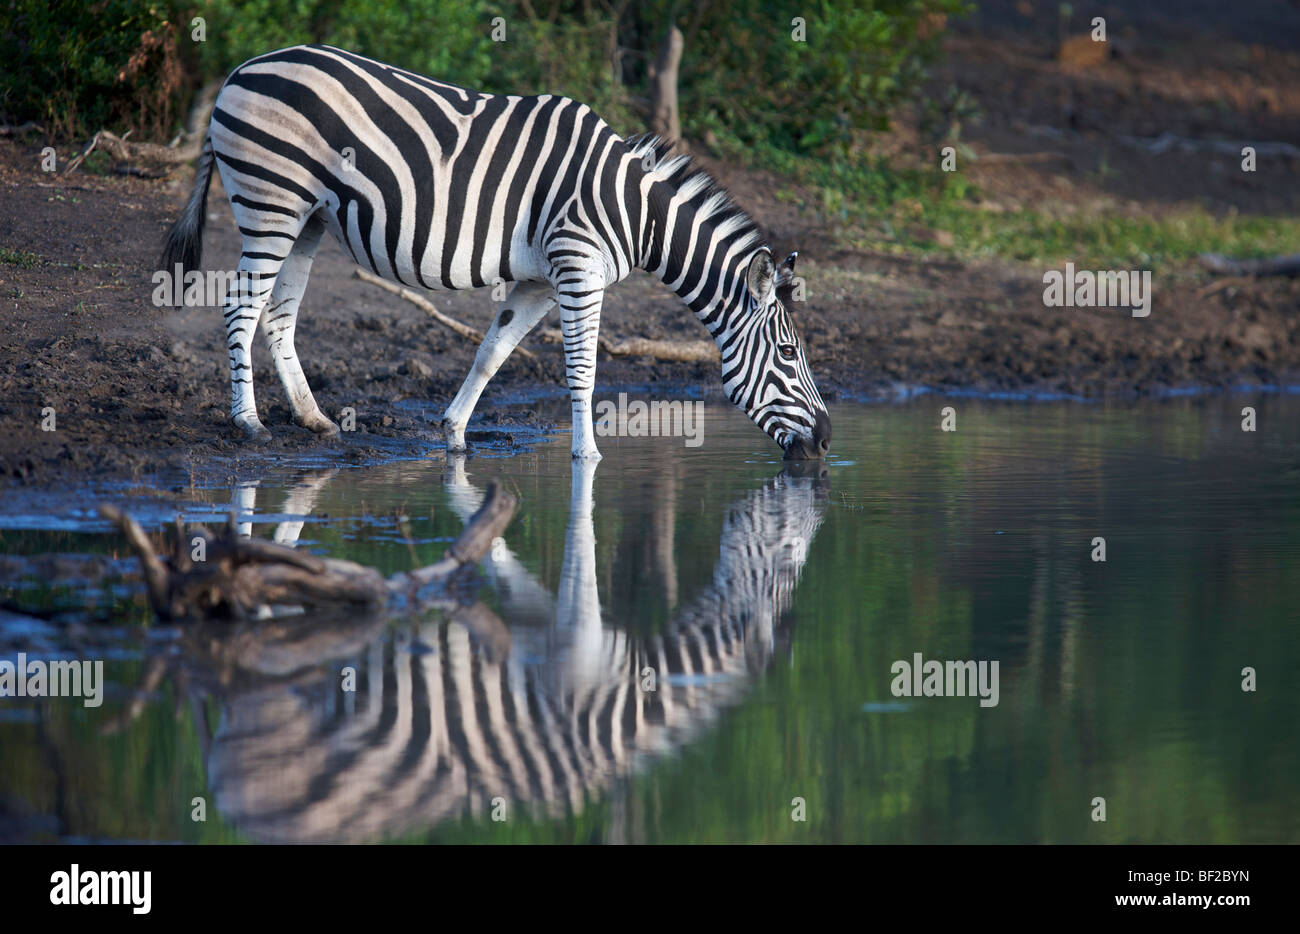 View of a Zebra (Equus burchellii) drinking water, Ithala Game Reserve, Northern KwaZulu-Natal Province, South Africa. Stock Photo